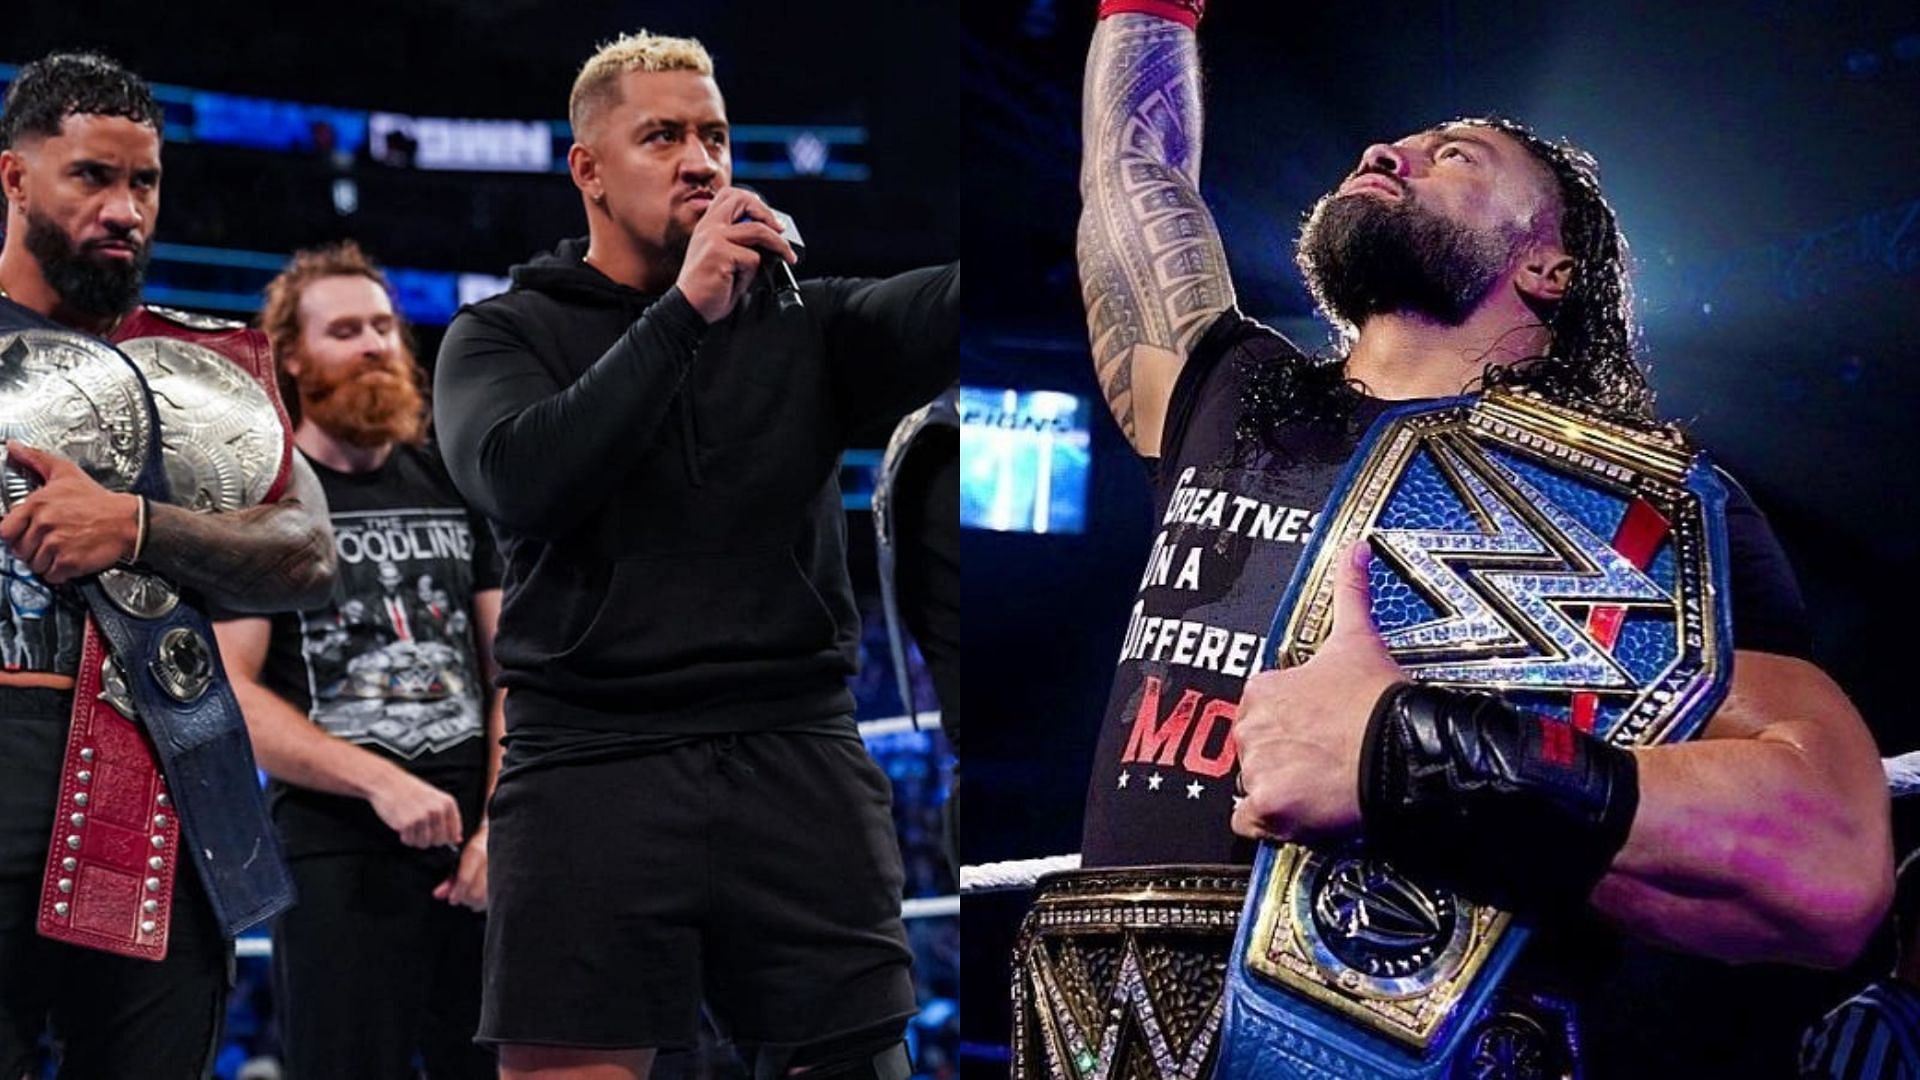 Could The Bloodline engage in a feud with a popular faction on SmackDown?